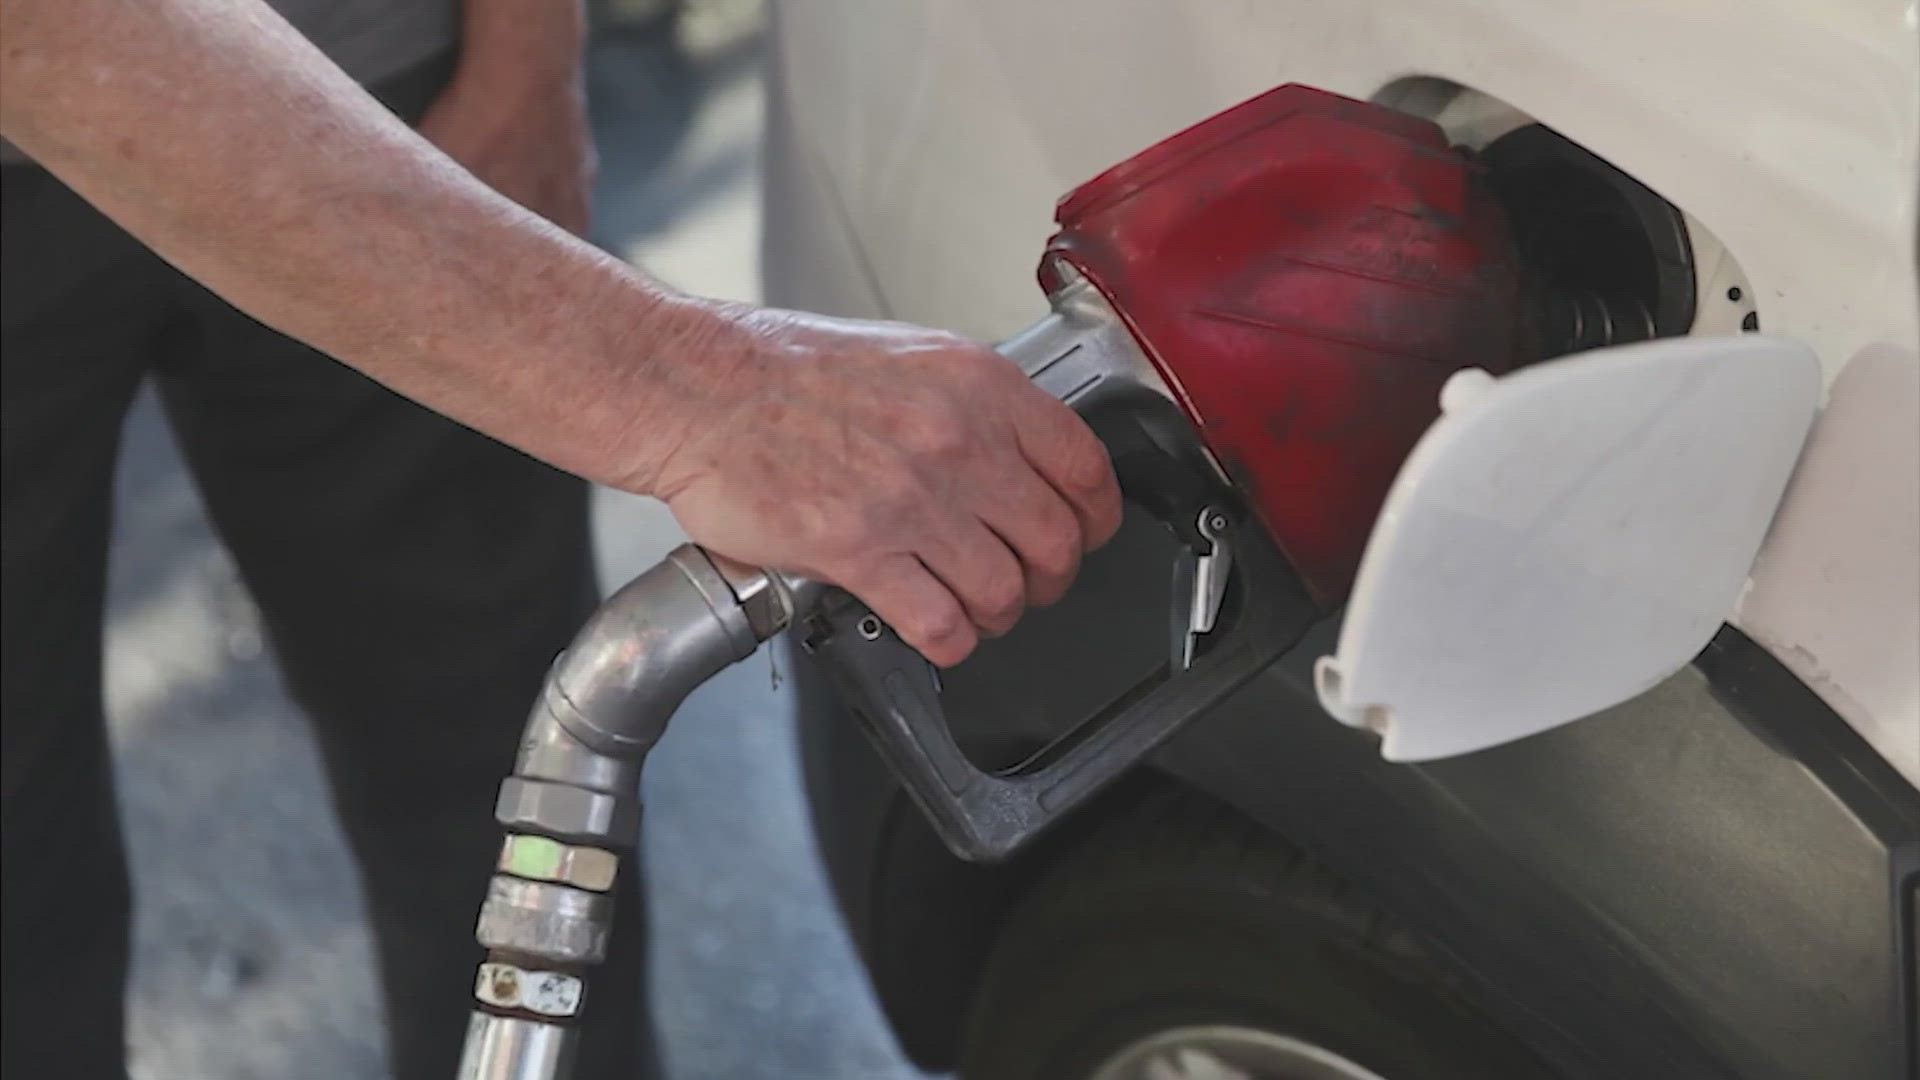 With so many, expected to hit the road this summer, Ron Trevino explains why the drop in gas prices is happening, right now.